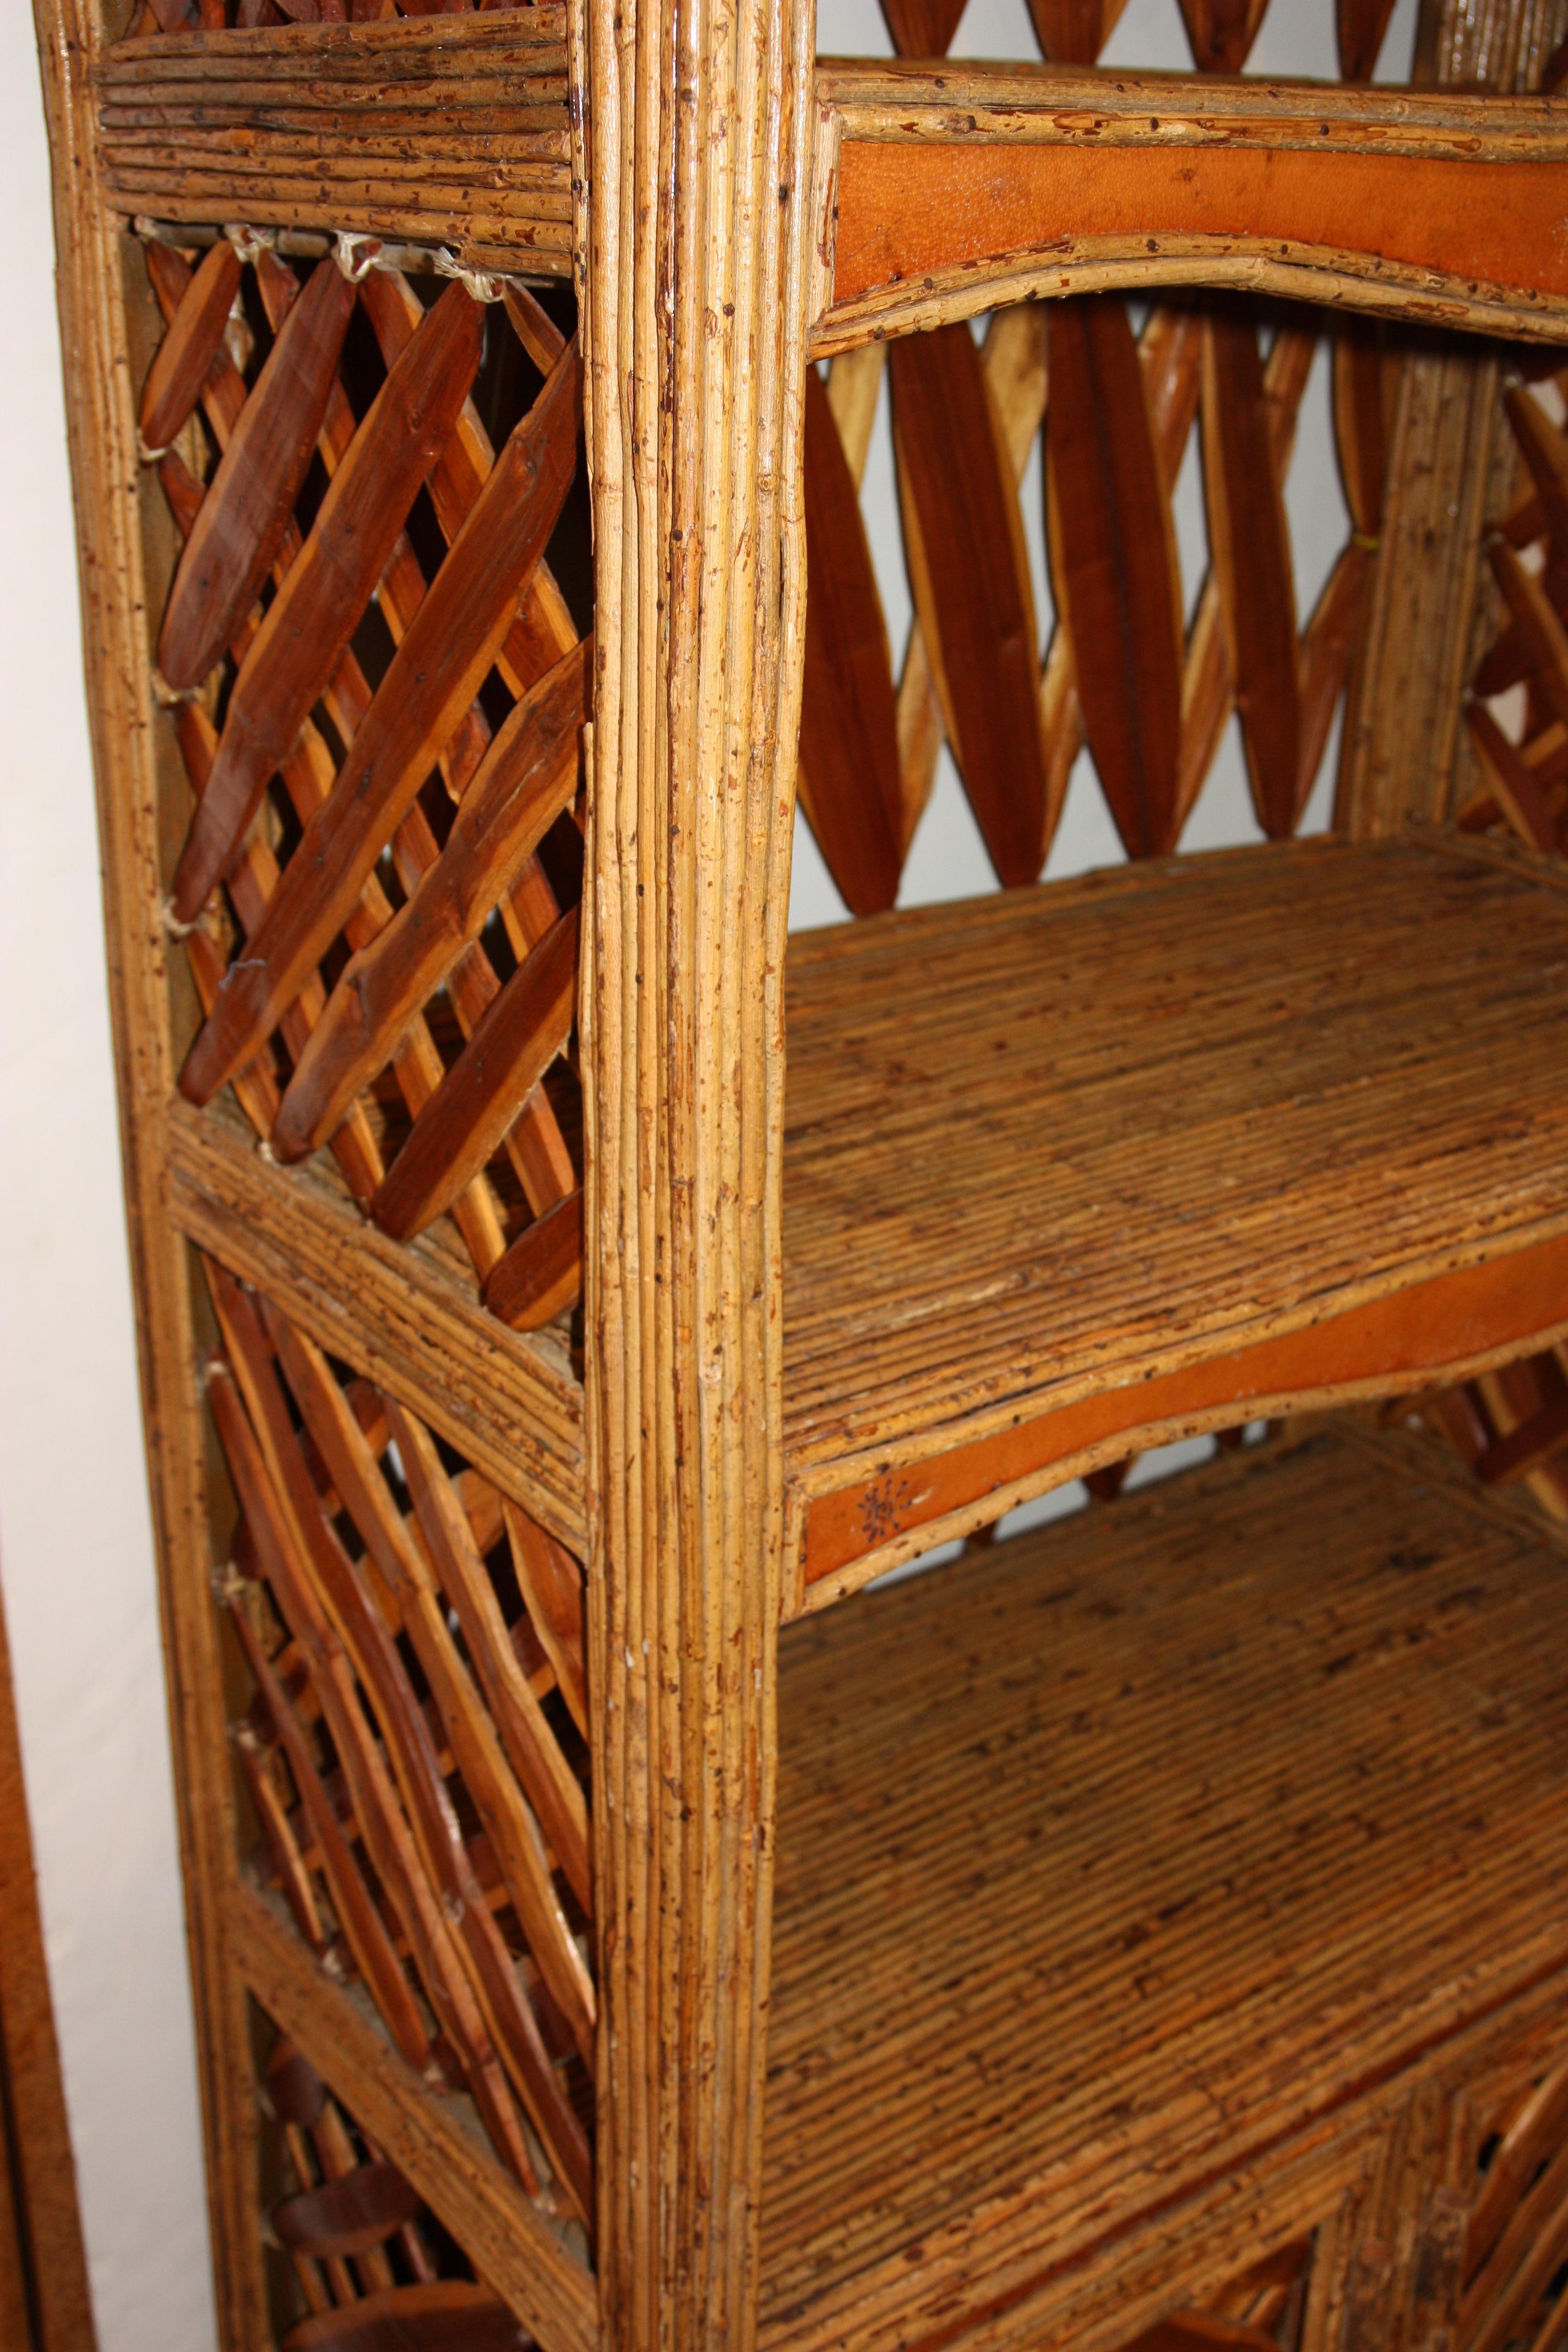 Equipale furniture brings with it a remarkable rustic Mexican flair. This handmade rustic case piece is crafted using tanned pigskin for the lining and Mexican cedar strips for the structure.
 